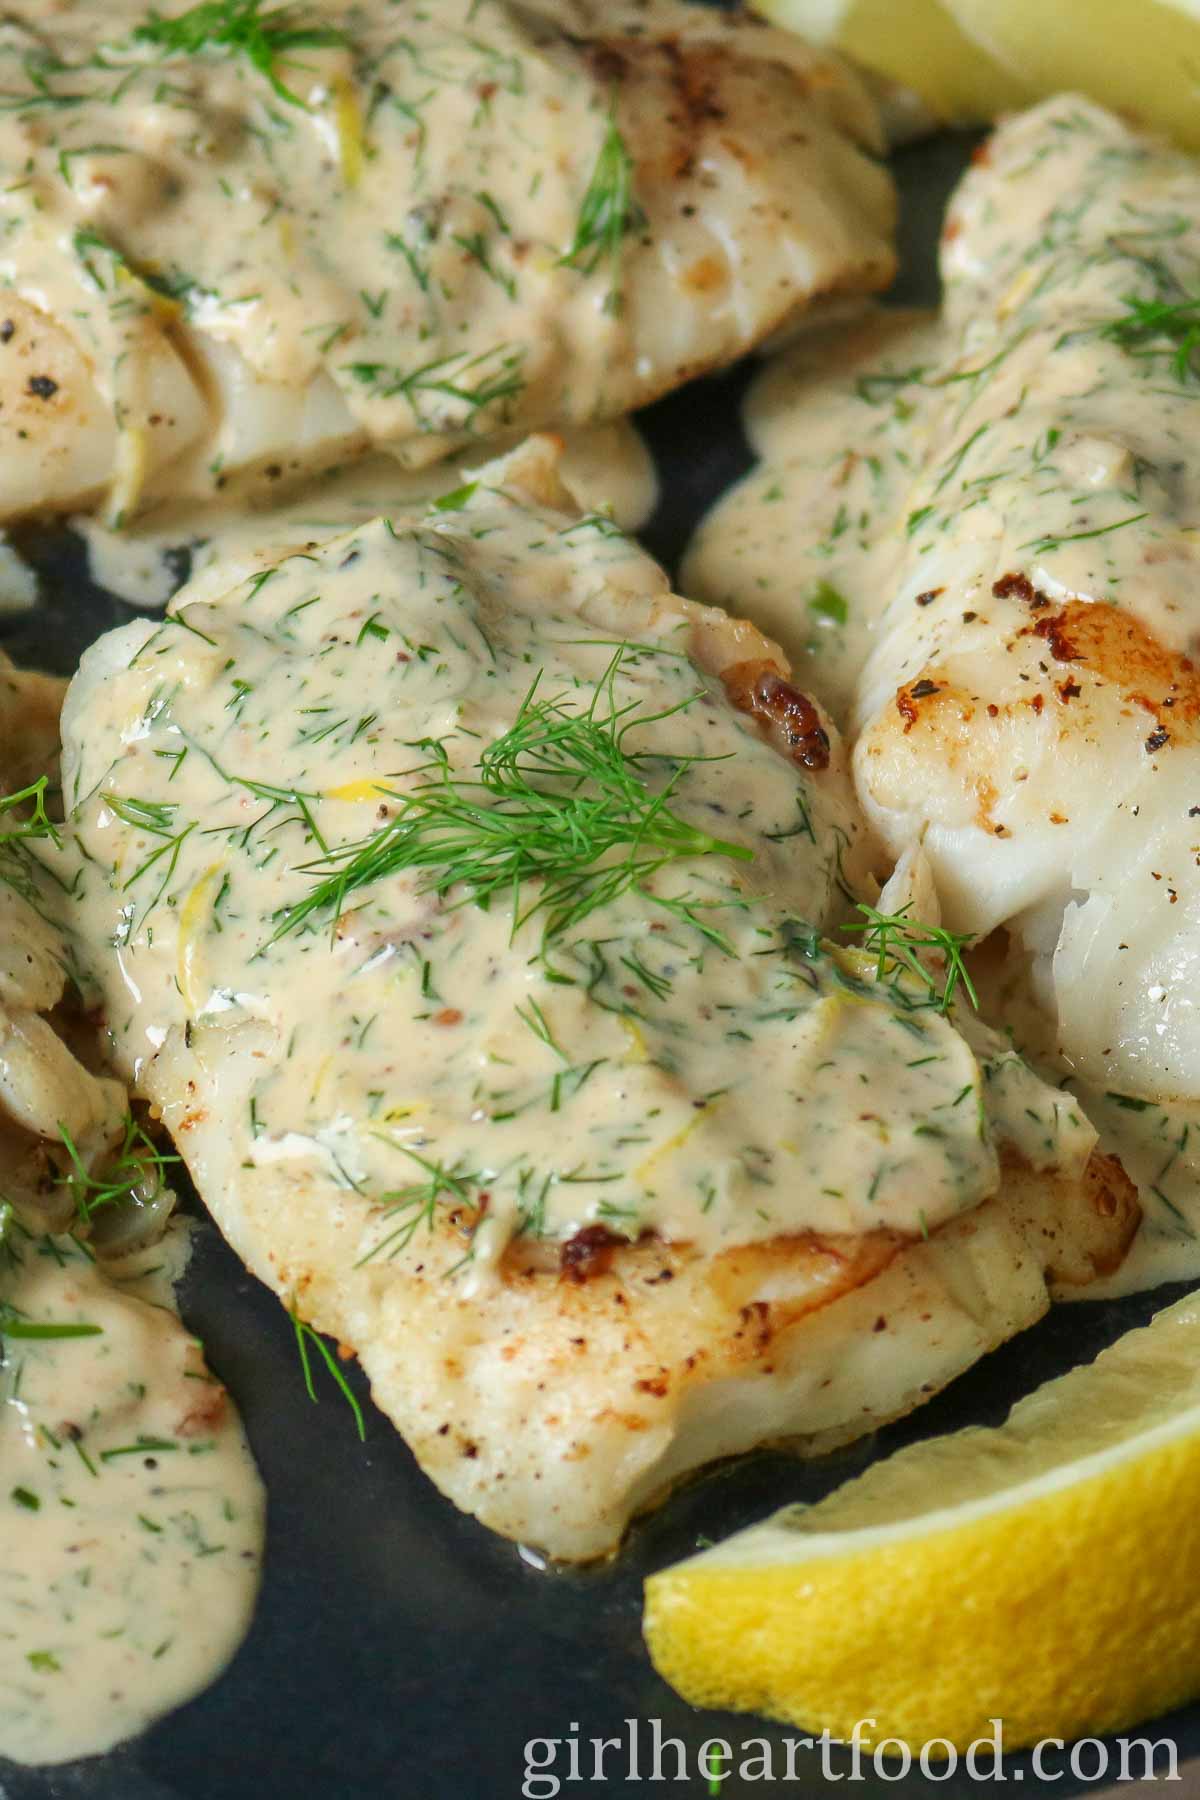 Close-up of a cod fillet covered in a creamy dill sauce next to a lemon wedge.